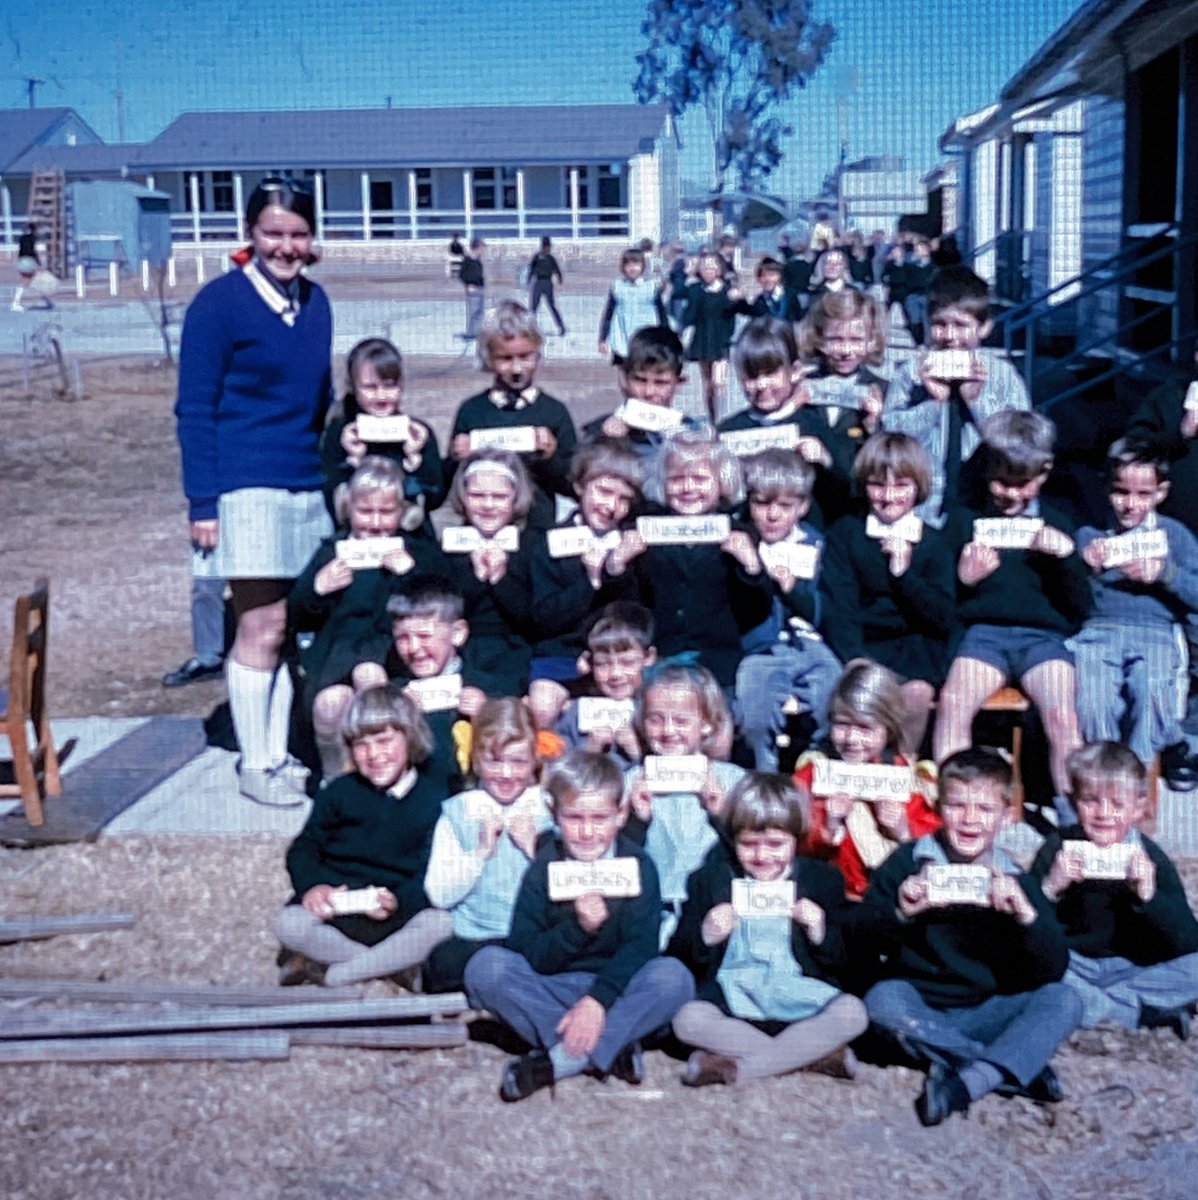 Miss Simpson (aka me) 1970 First year teaching At Barraba Central School. This was a K/1 class. School was K-12. Fab start to my #publiceducation career which spanned 40 yrs. #publiceducationday #proudtobepublic